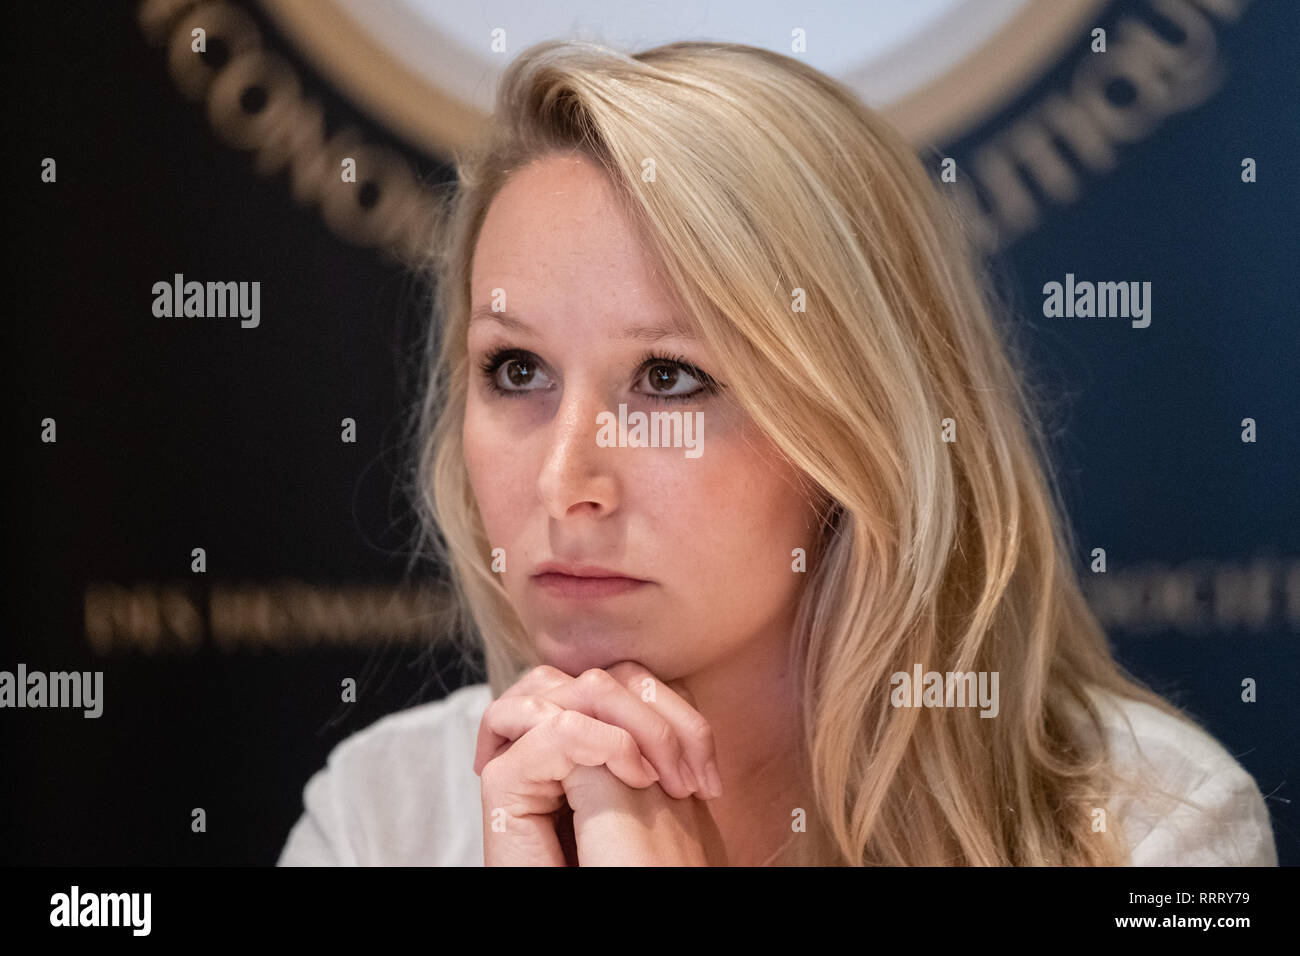 Marion Maréchal Le Pen is a French politician. She has created a ...